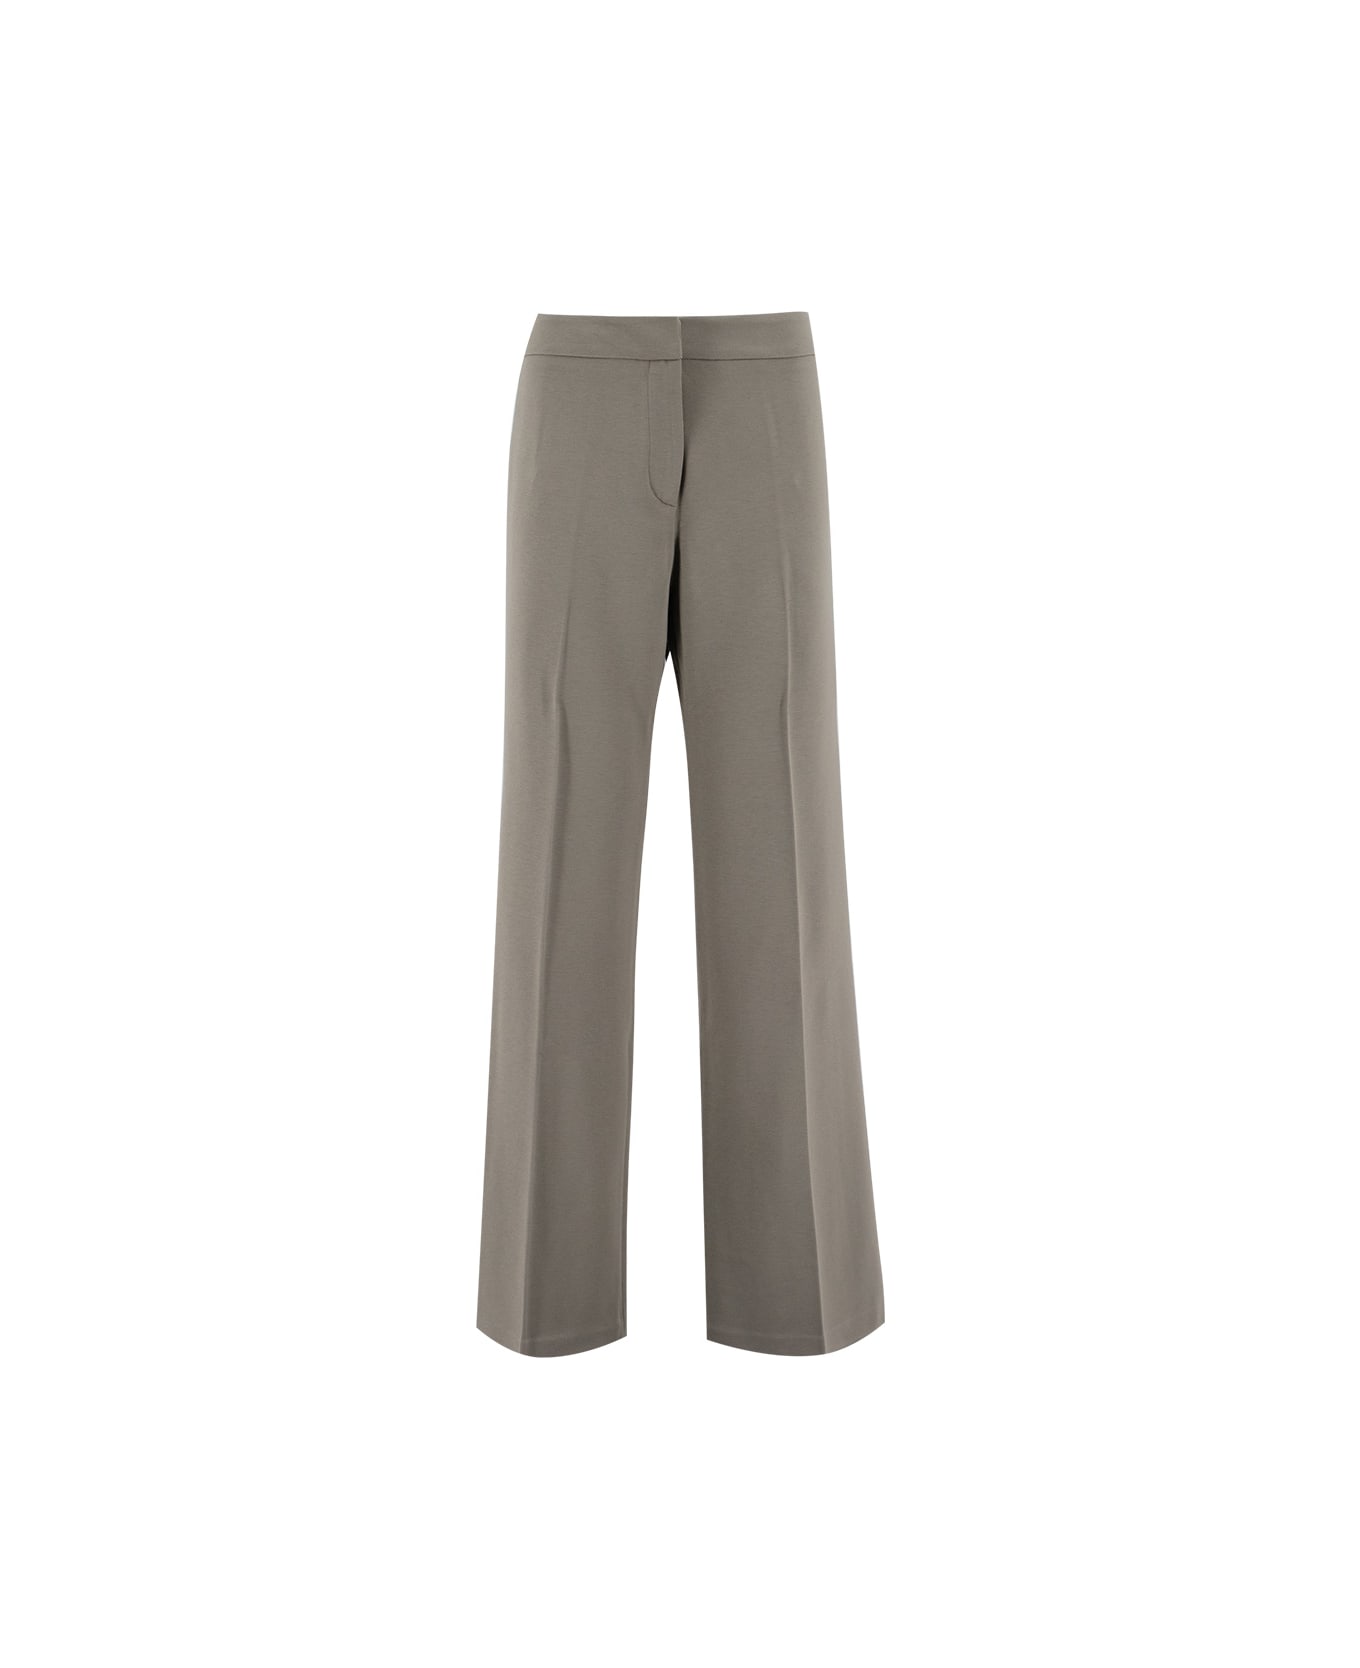 Le Tricot Perugia Trousers - MIDDLE GREY ボトムス